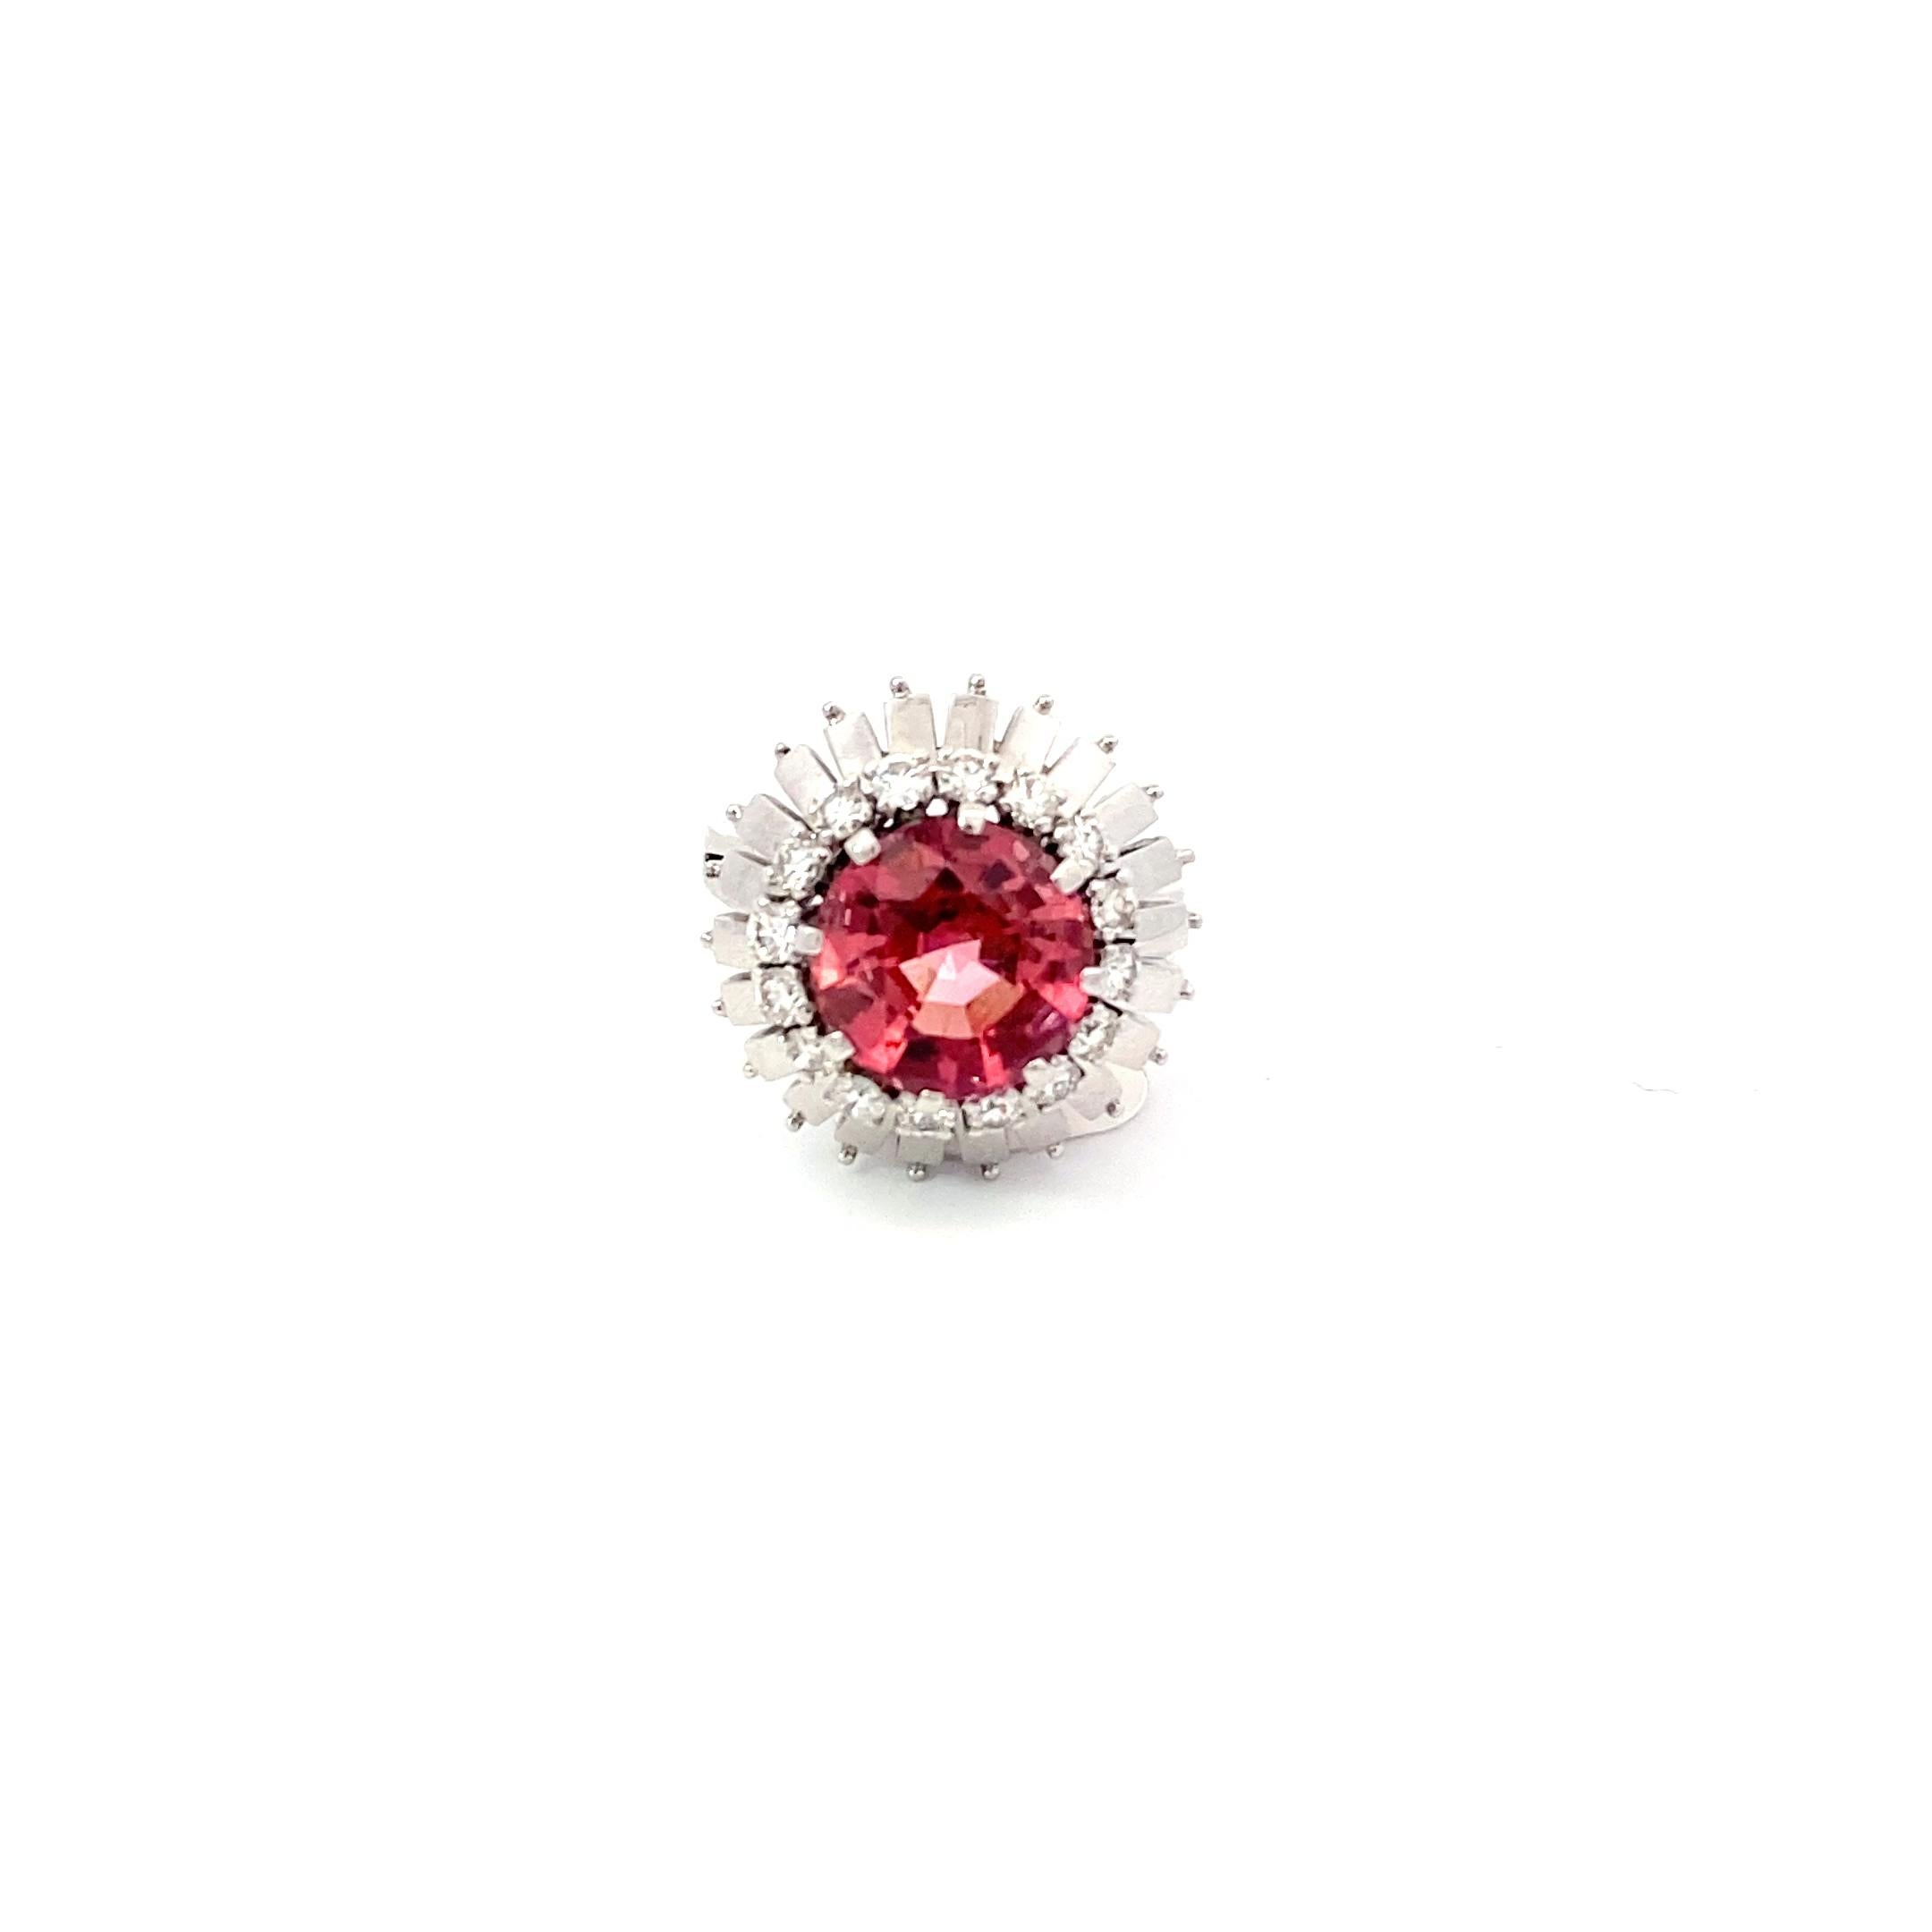 This ring from the 1960s has a very mid-century modern feel, featuring a halo of 0.9ct of Diamonds, a second halo of structural and shiny 18k White Gold surrounding a gorgeous 5.08ct Natural Pink Tourmaline (graded F VS2). The center Tourmaline has